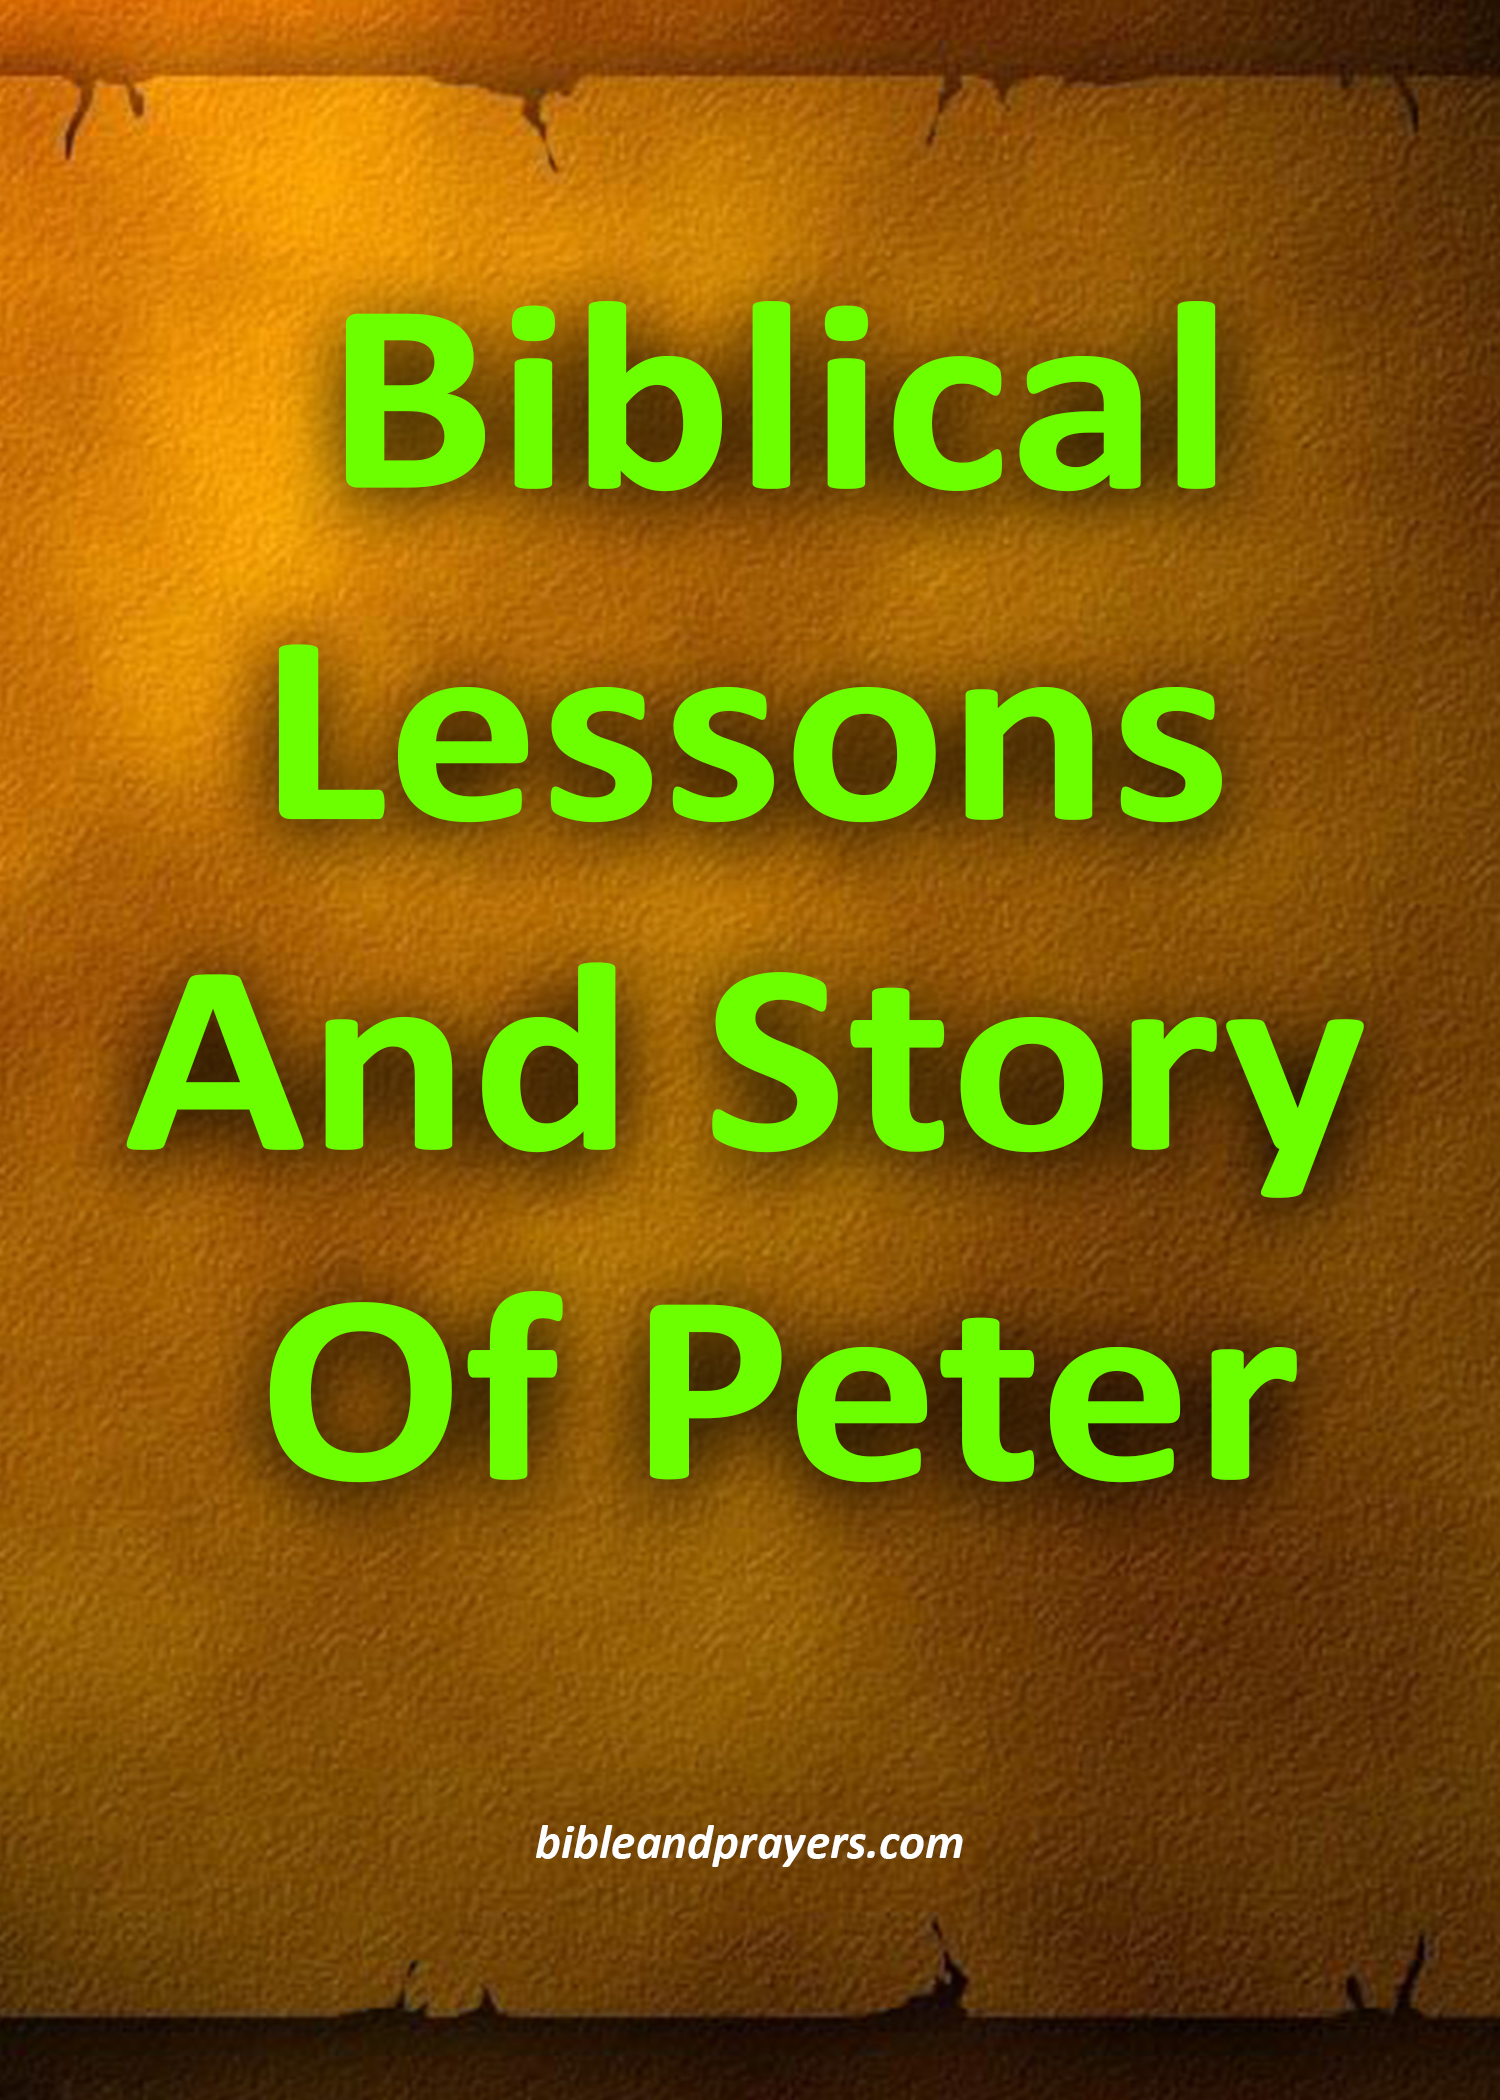 Biblical Lessons And Story Of Peter